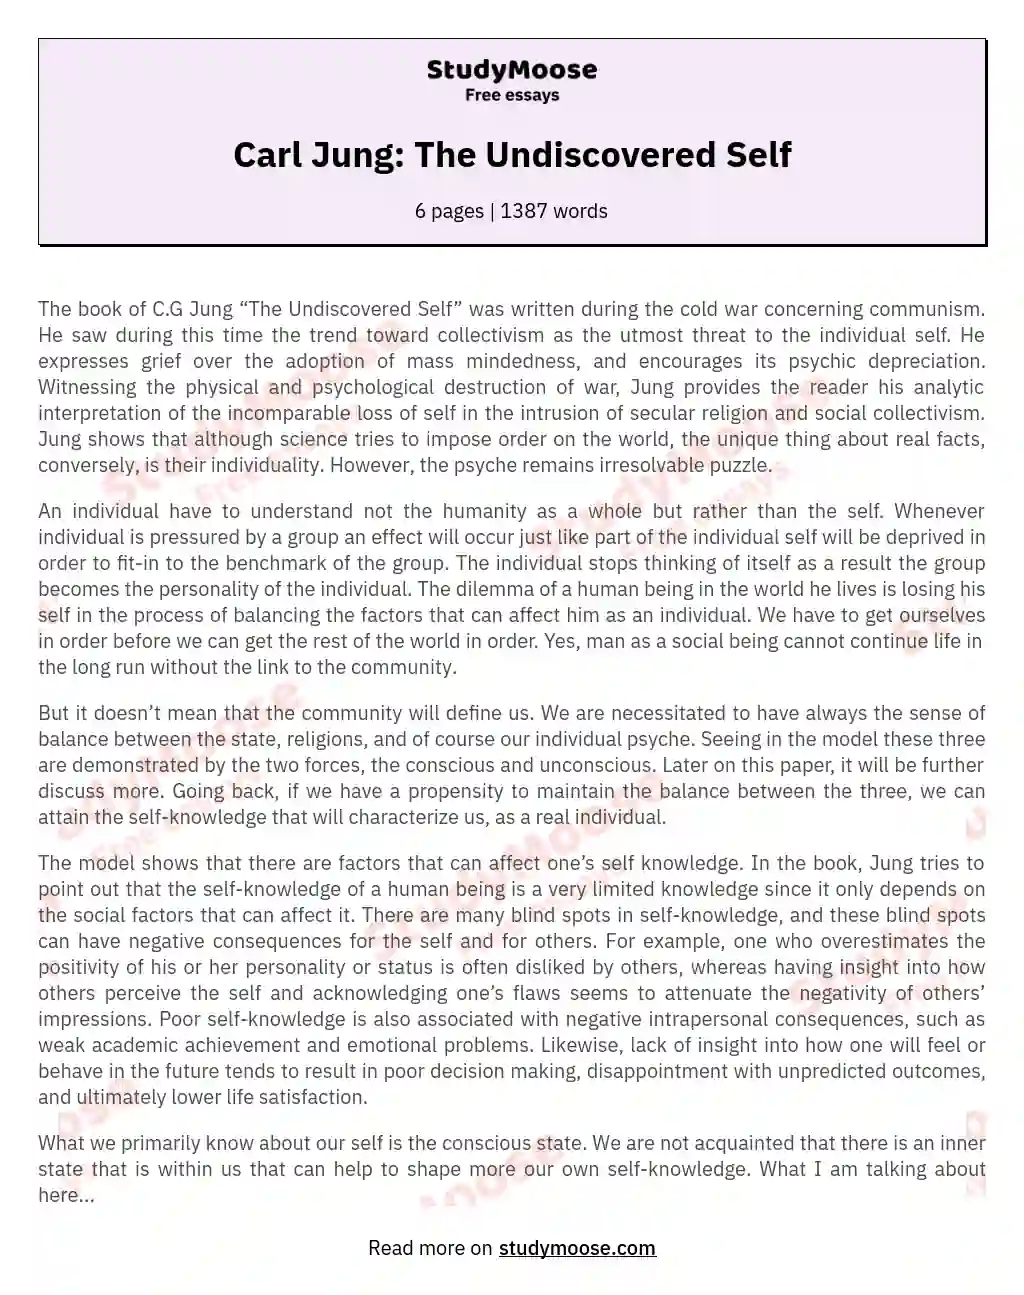 Carl Jung: The Undiscovered Self essay